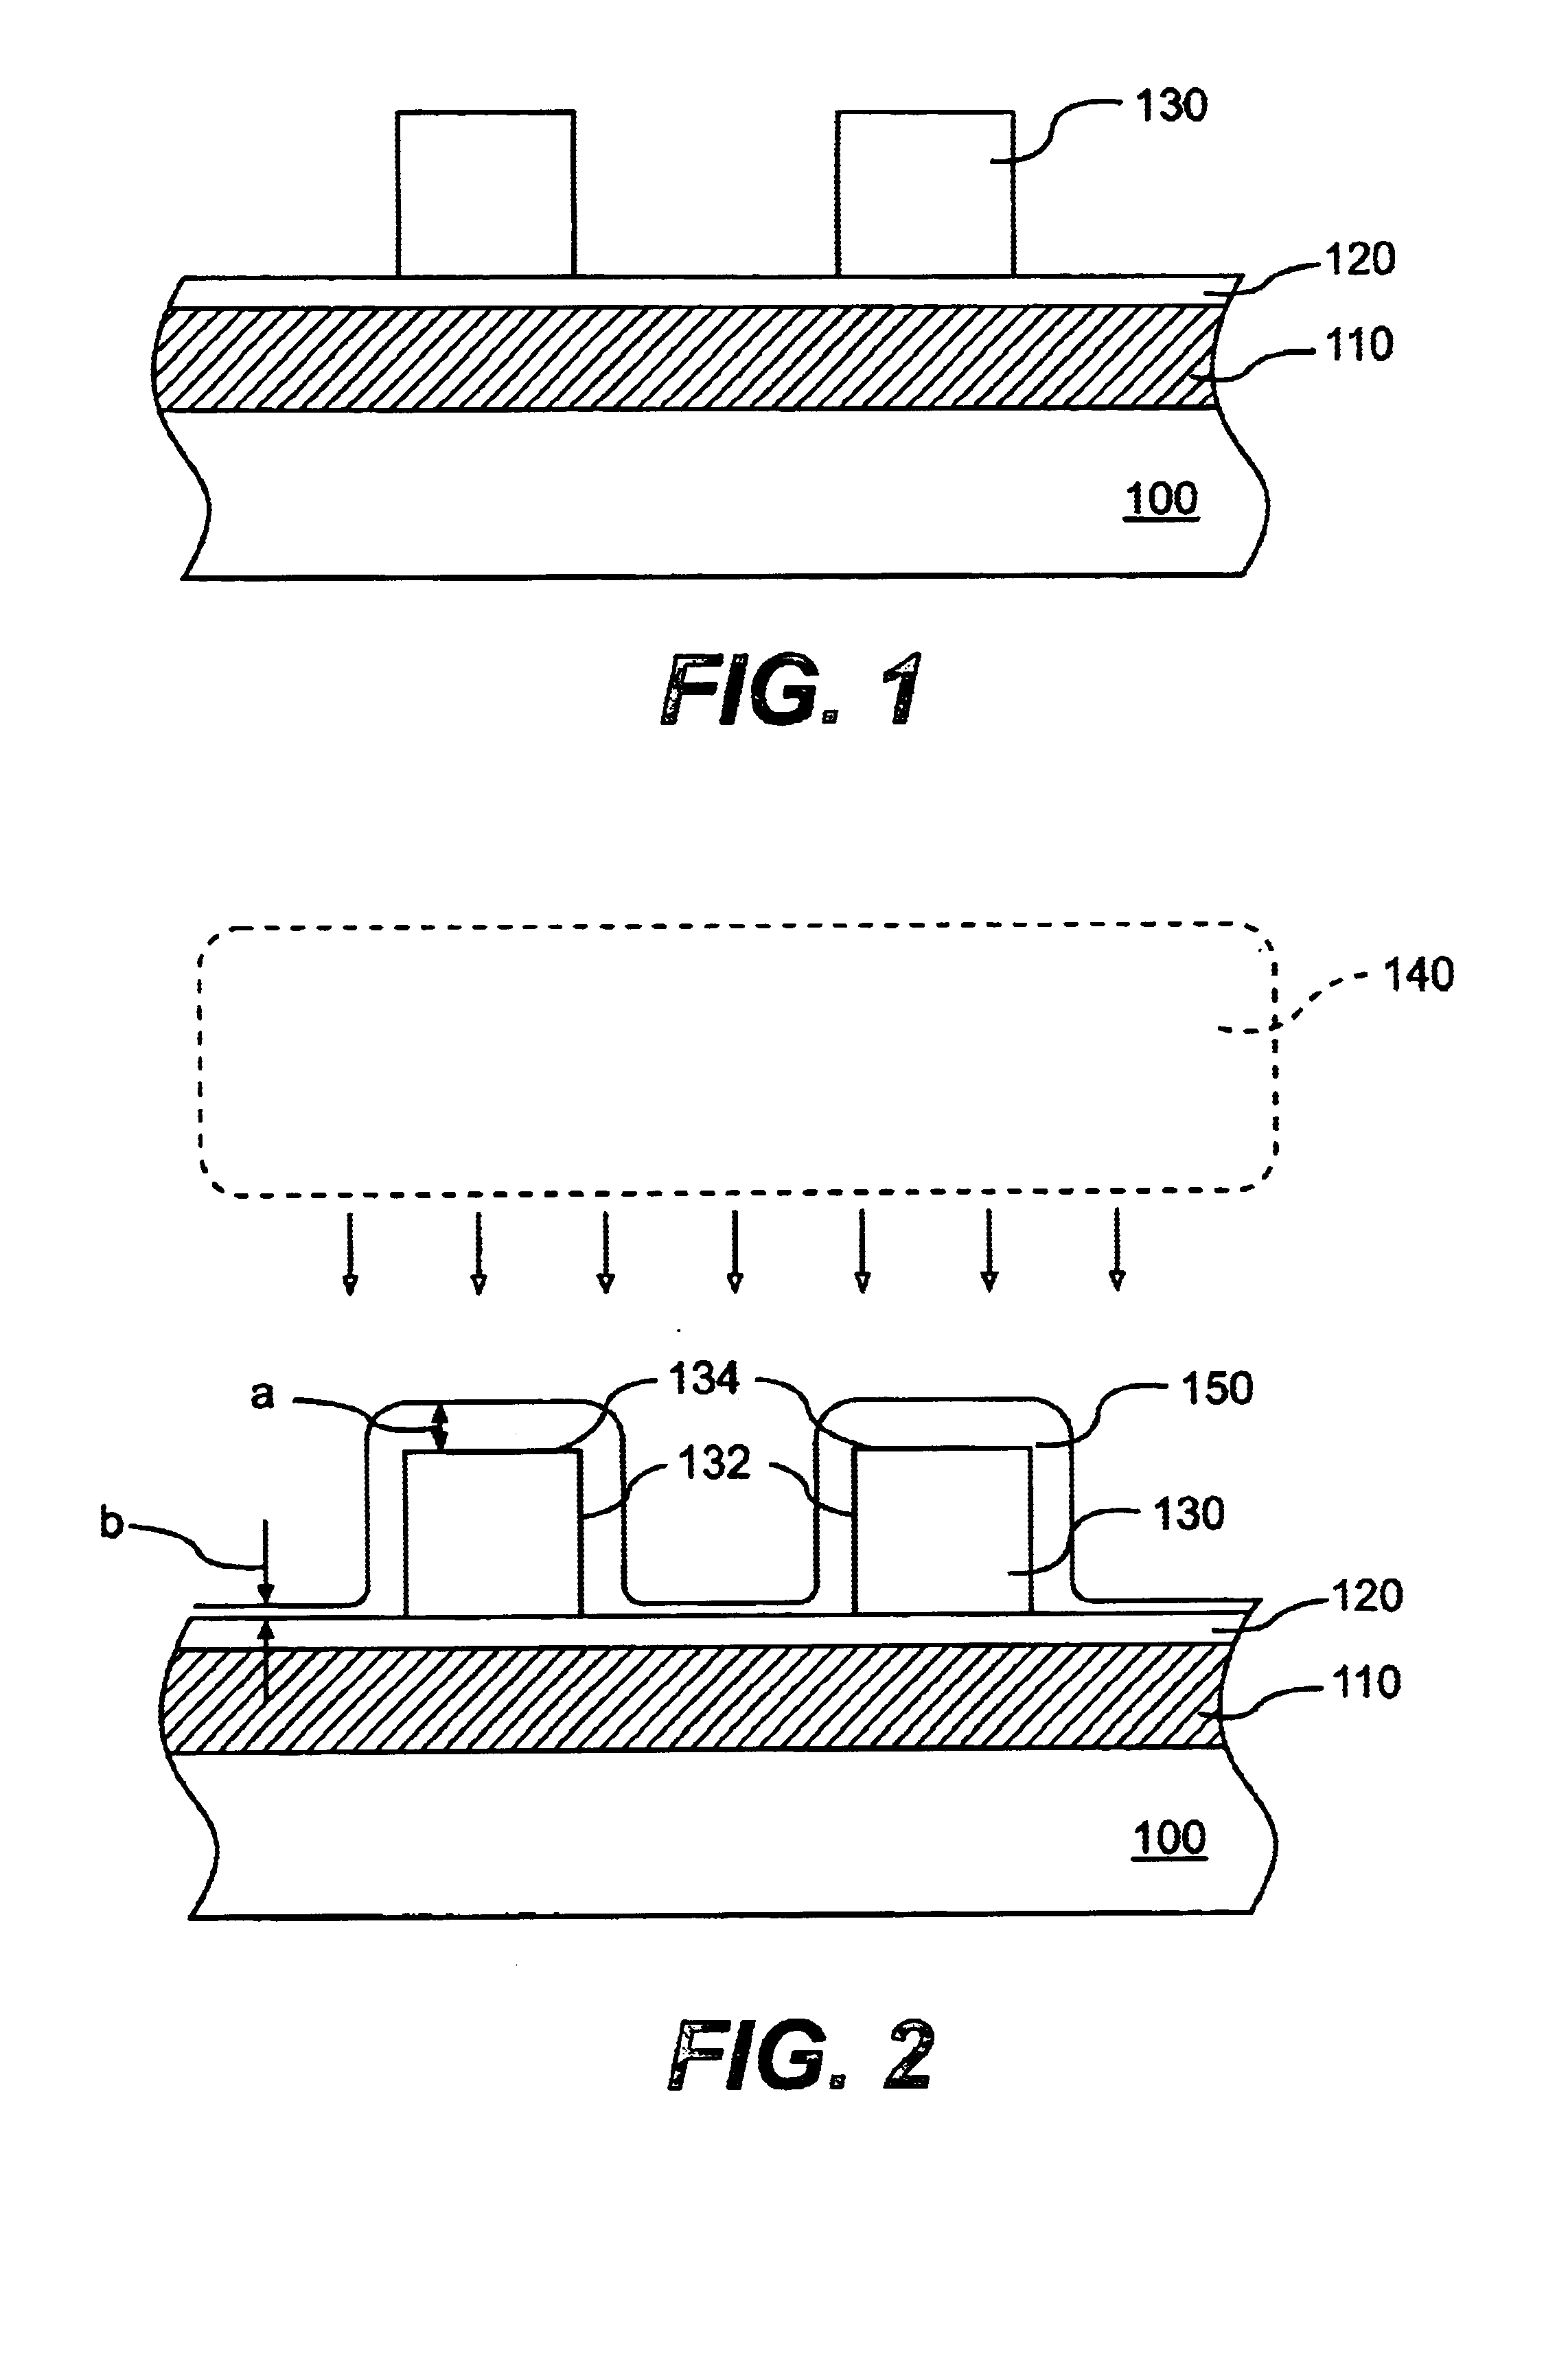 Method for reducing dimensions between patterns on a photoresist